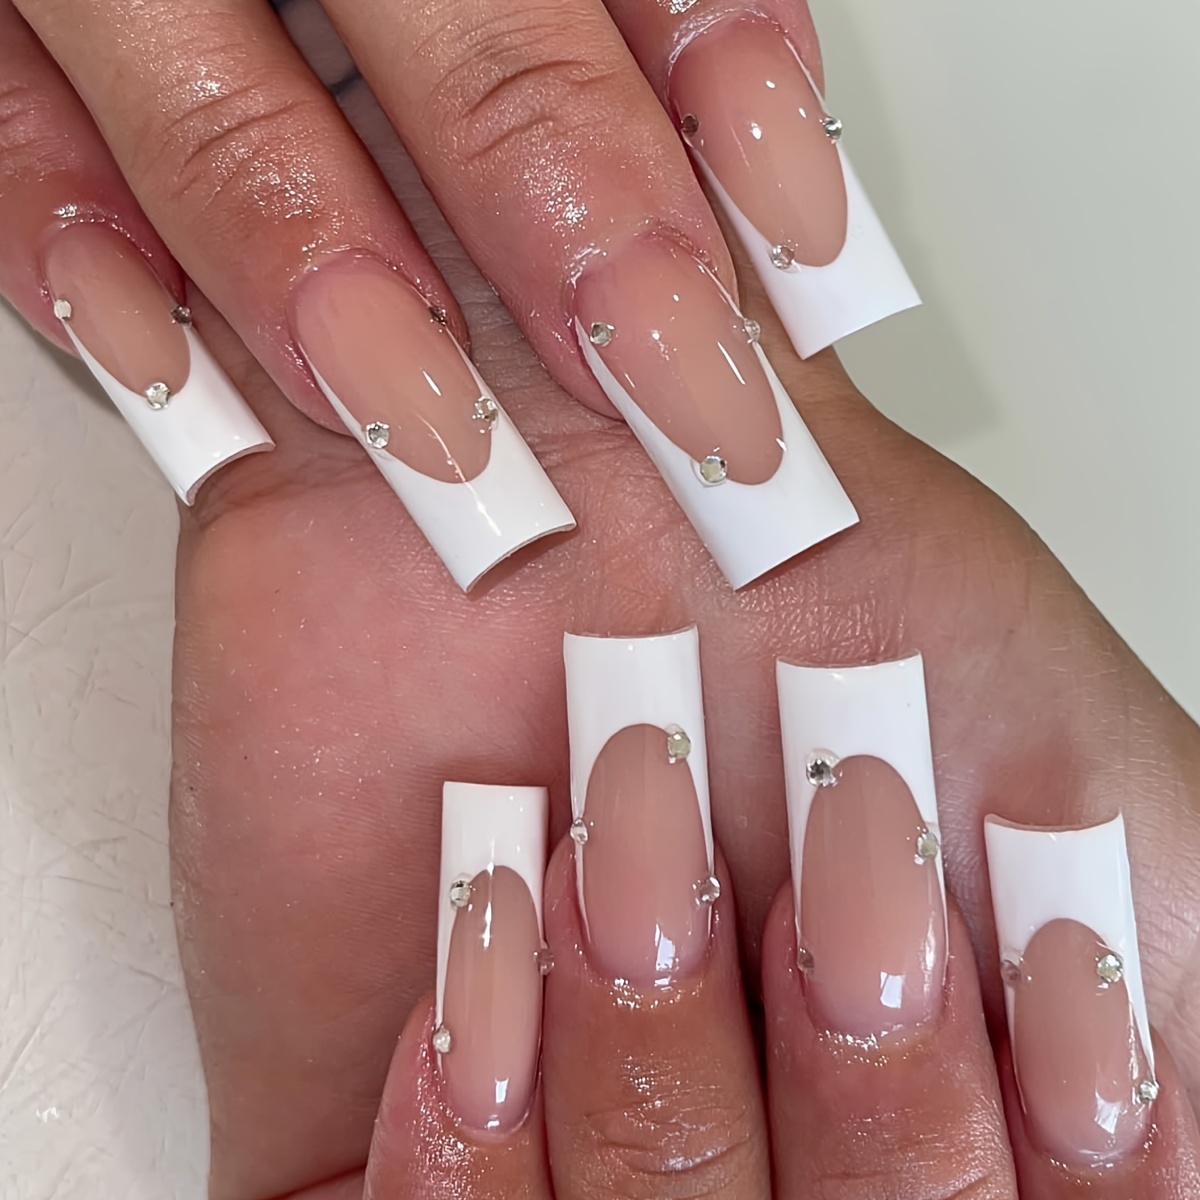 White long square nails with blue rhinestones  Nails design with  rhinestones, Bling acrylic nails, Long square acrylic nails